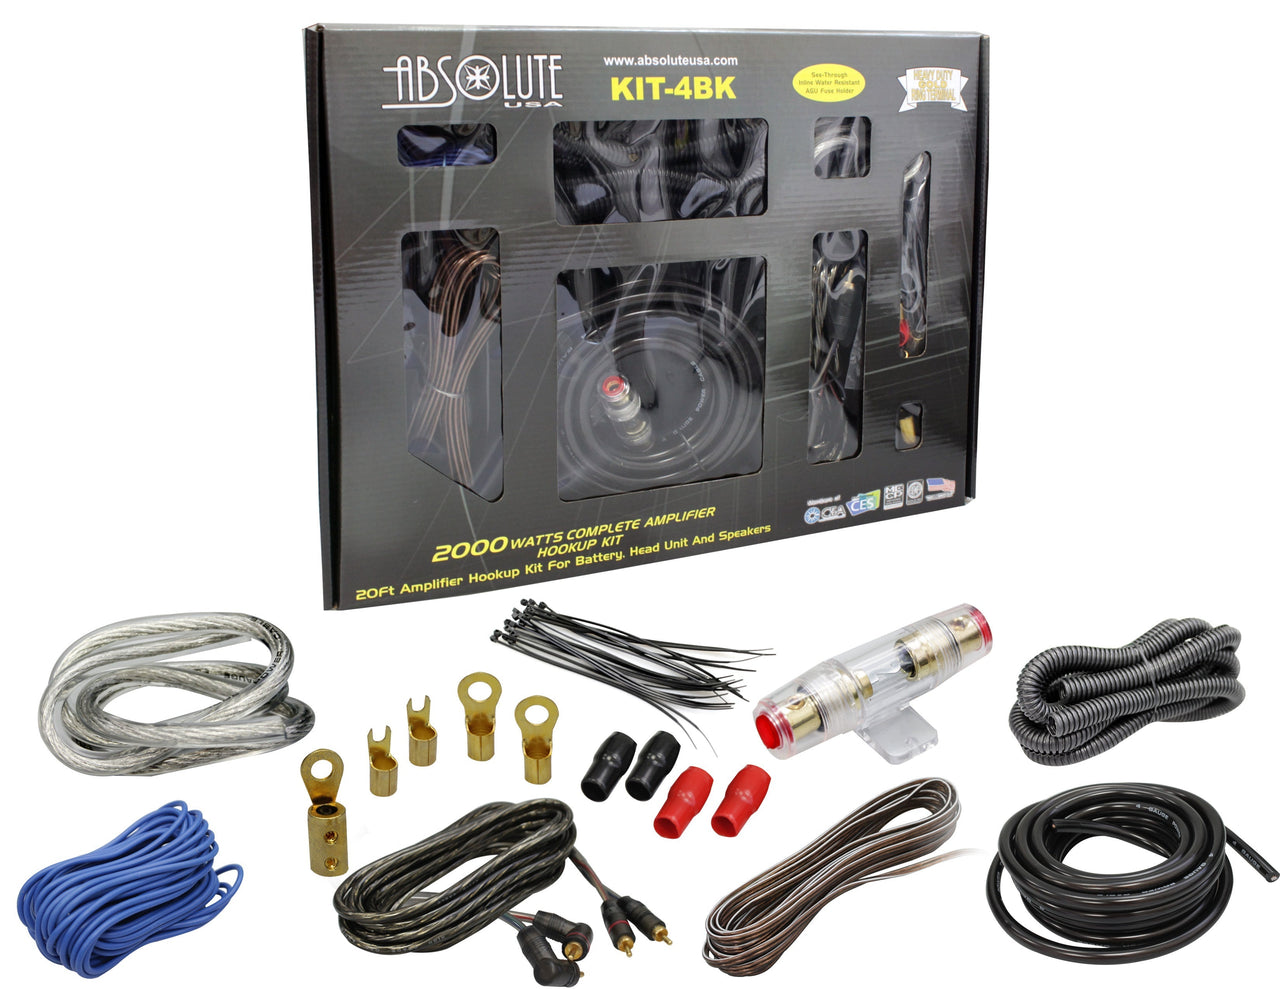 Absolute USA KIT4BK<br/> Complete PRO Marine 4 Gauge 2000 Watts Amplifier Complete Installation Amp Kit Power Wiring with Black Accent Color Scheme